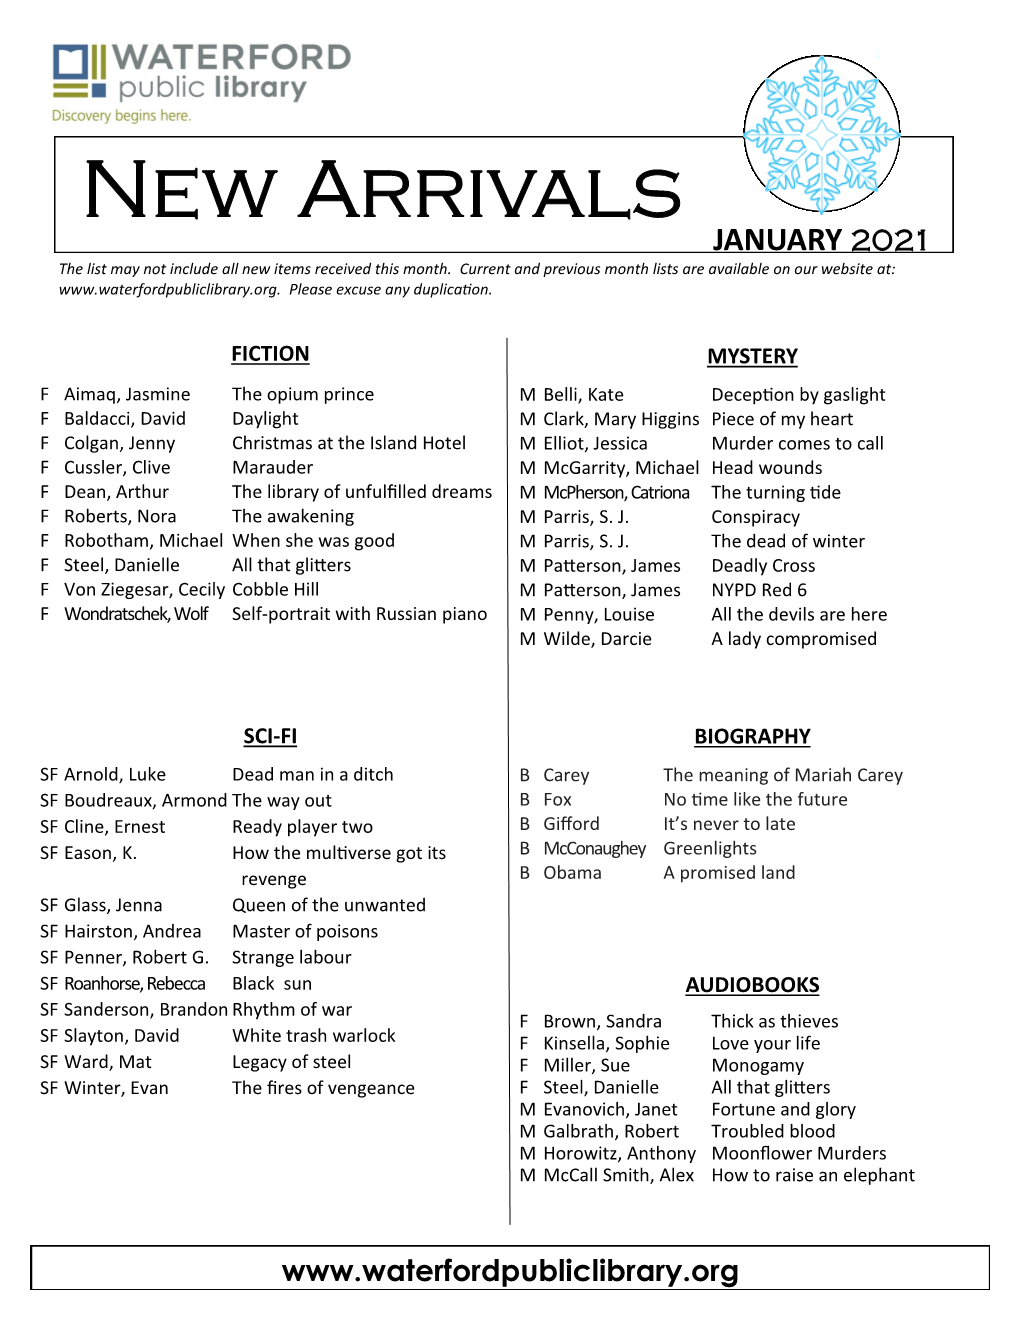 New Arrivals JANUARY 2021 the List May Not Include All New Items Received This Month